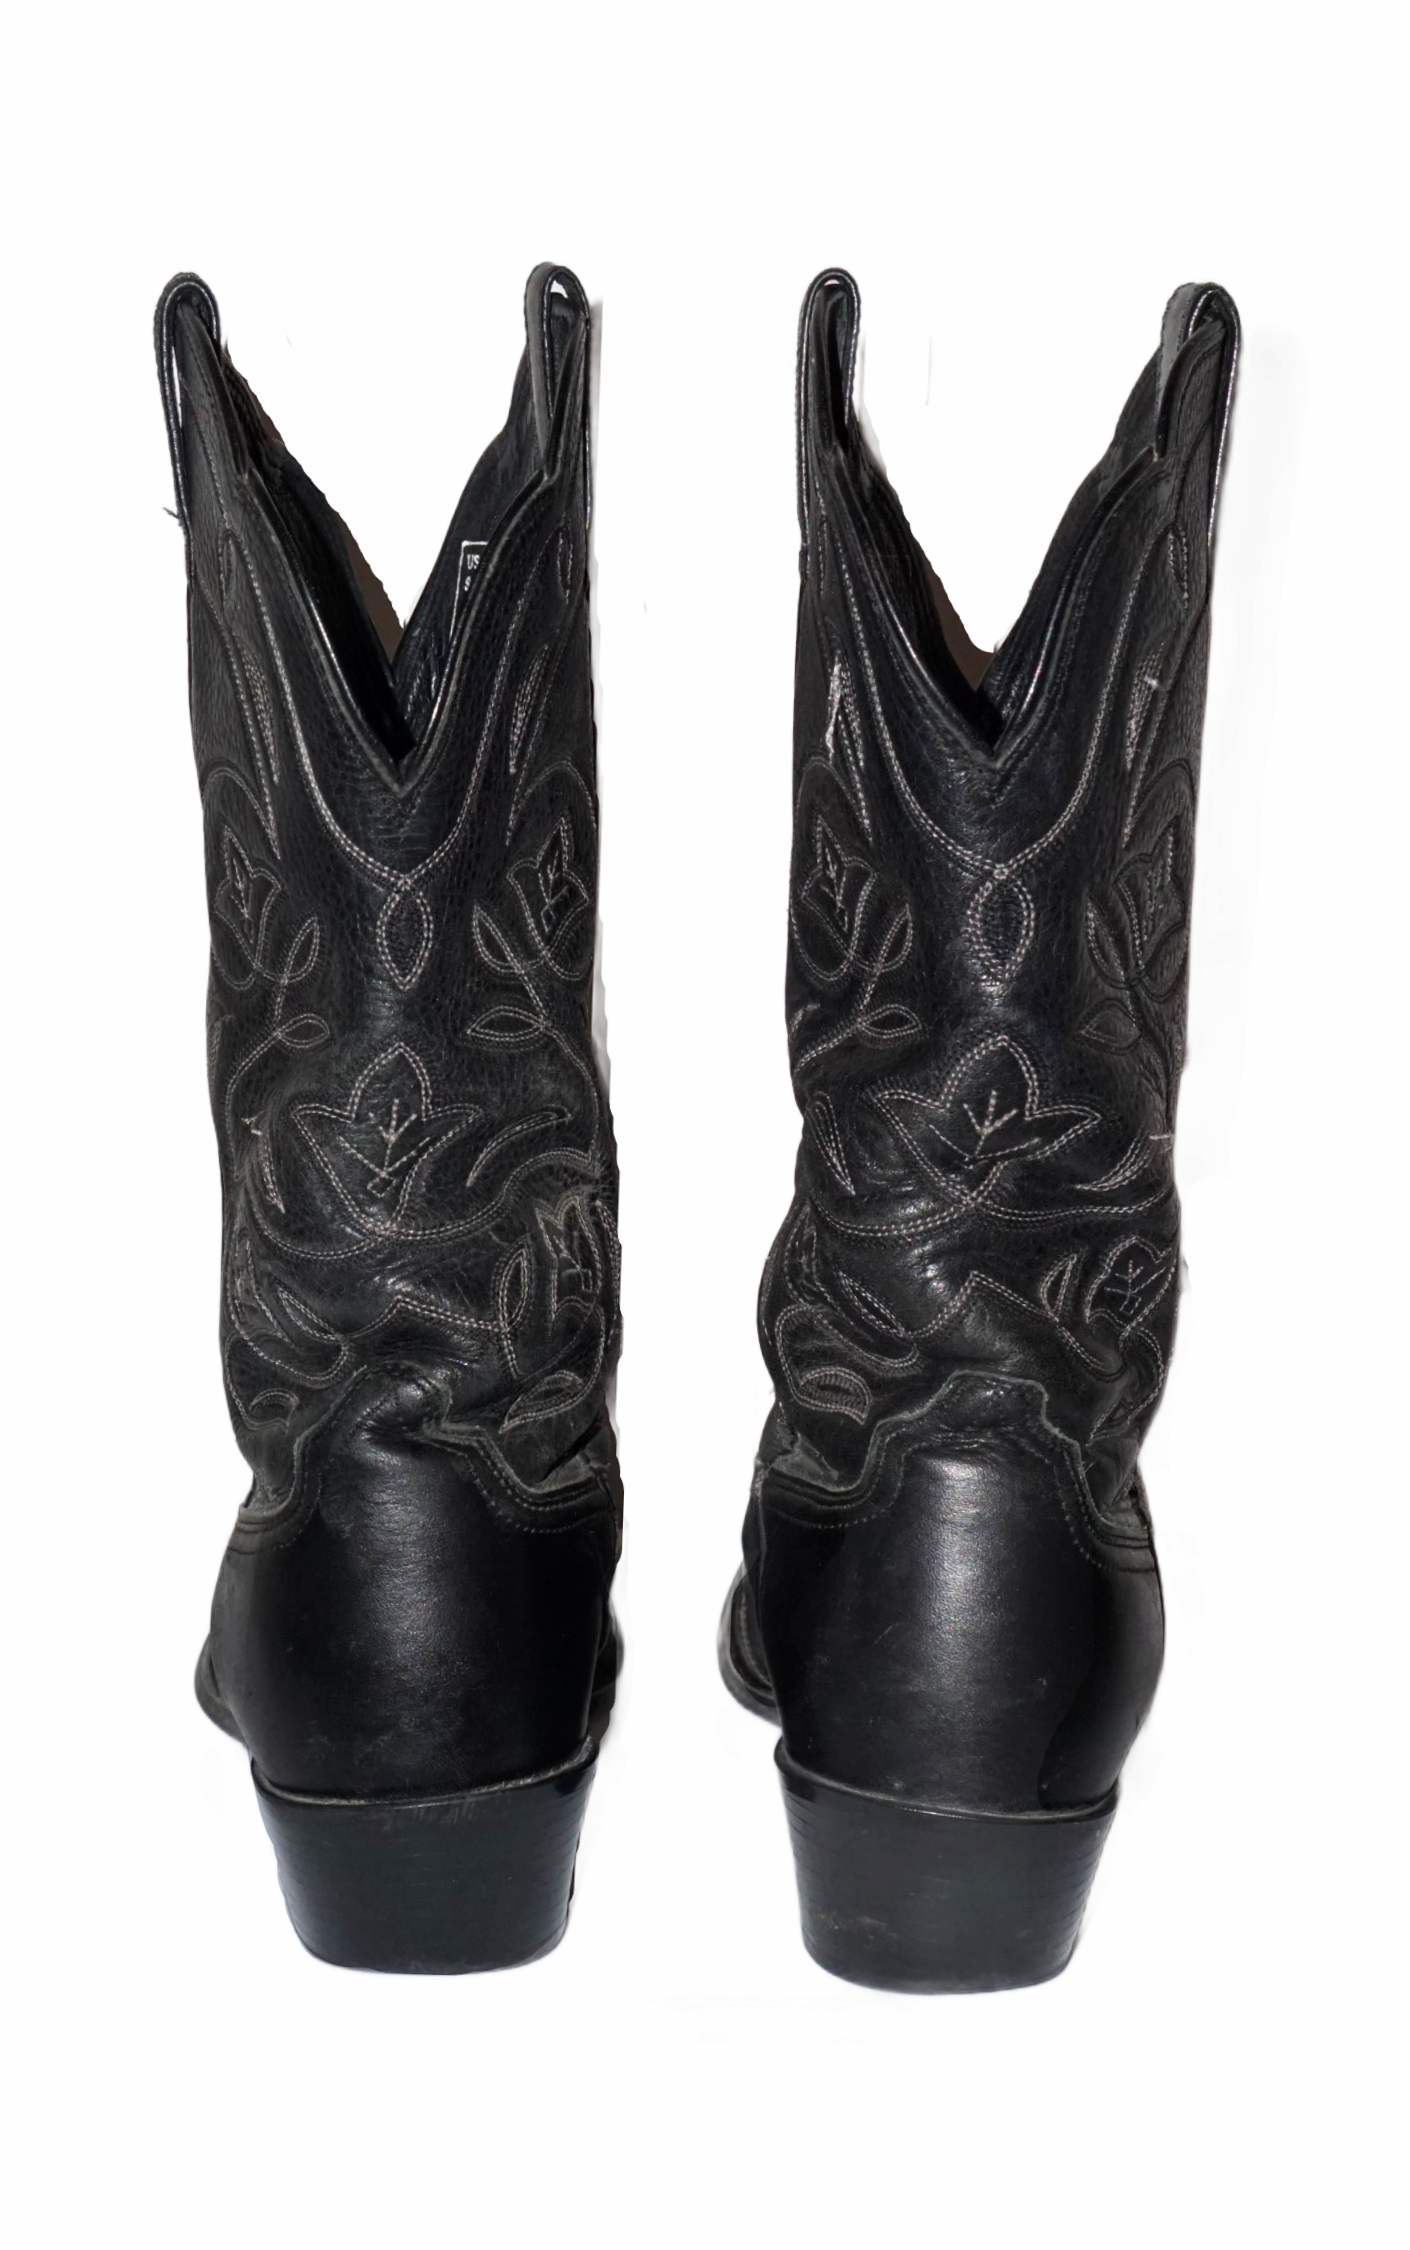 VINTAGE Black Leather Flower Pattern Western Cowboy Riding Boots resellum